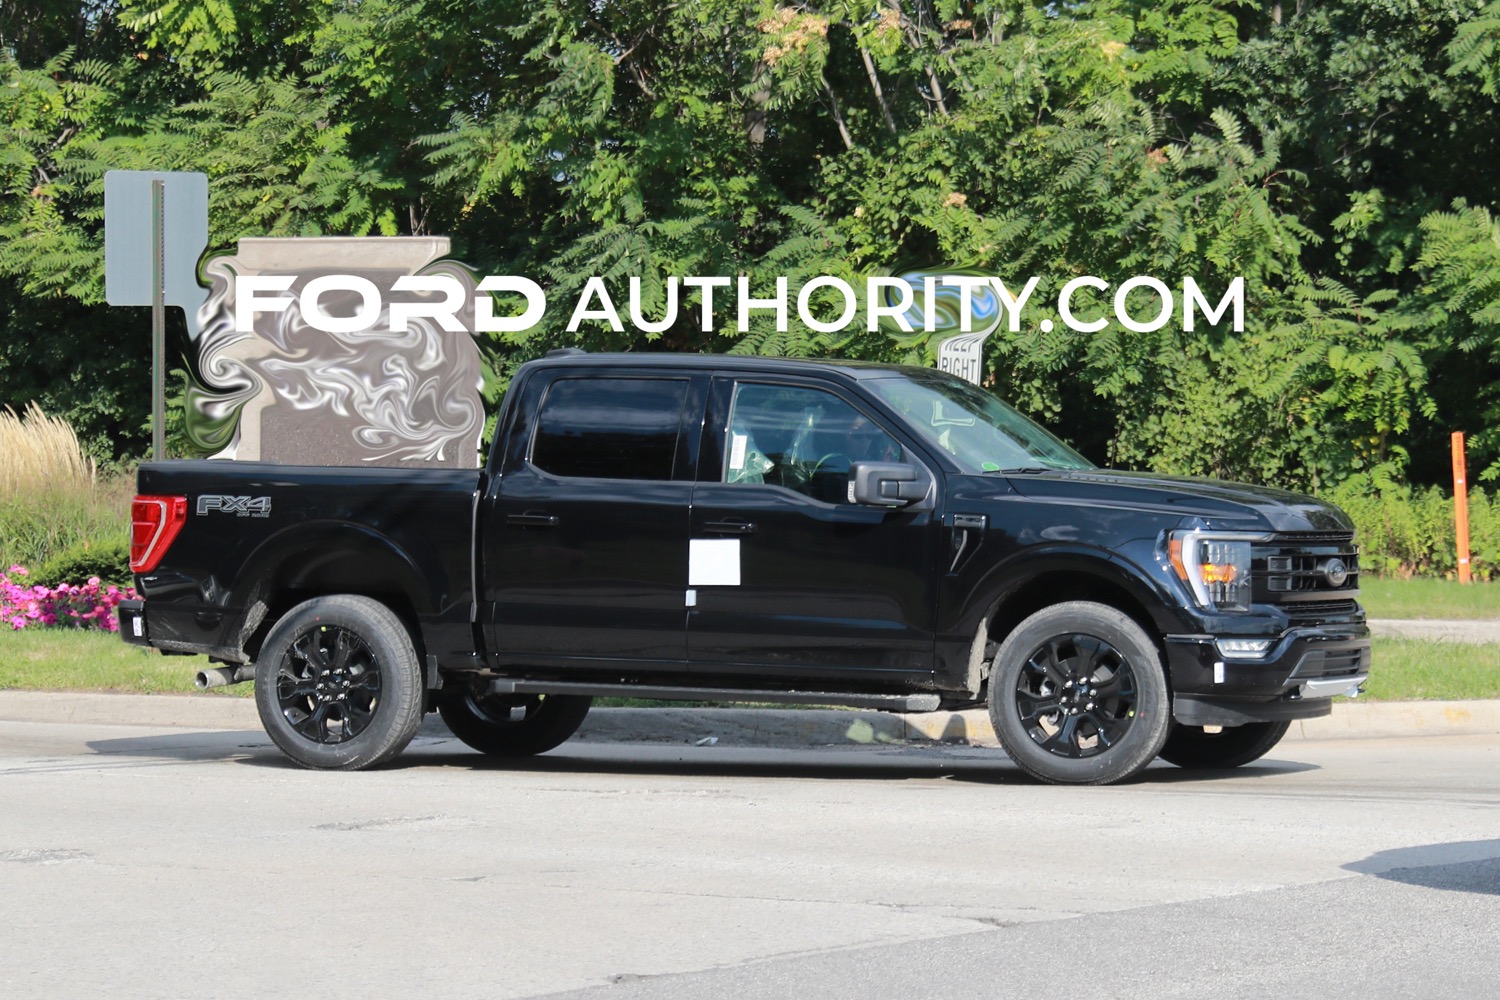 2022 Ford F150 Black Appearance Package Looks Great